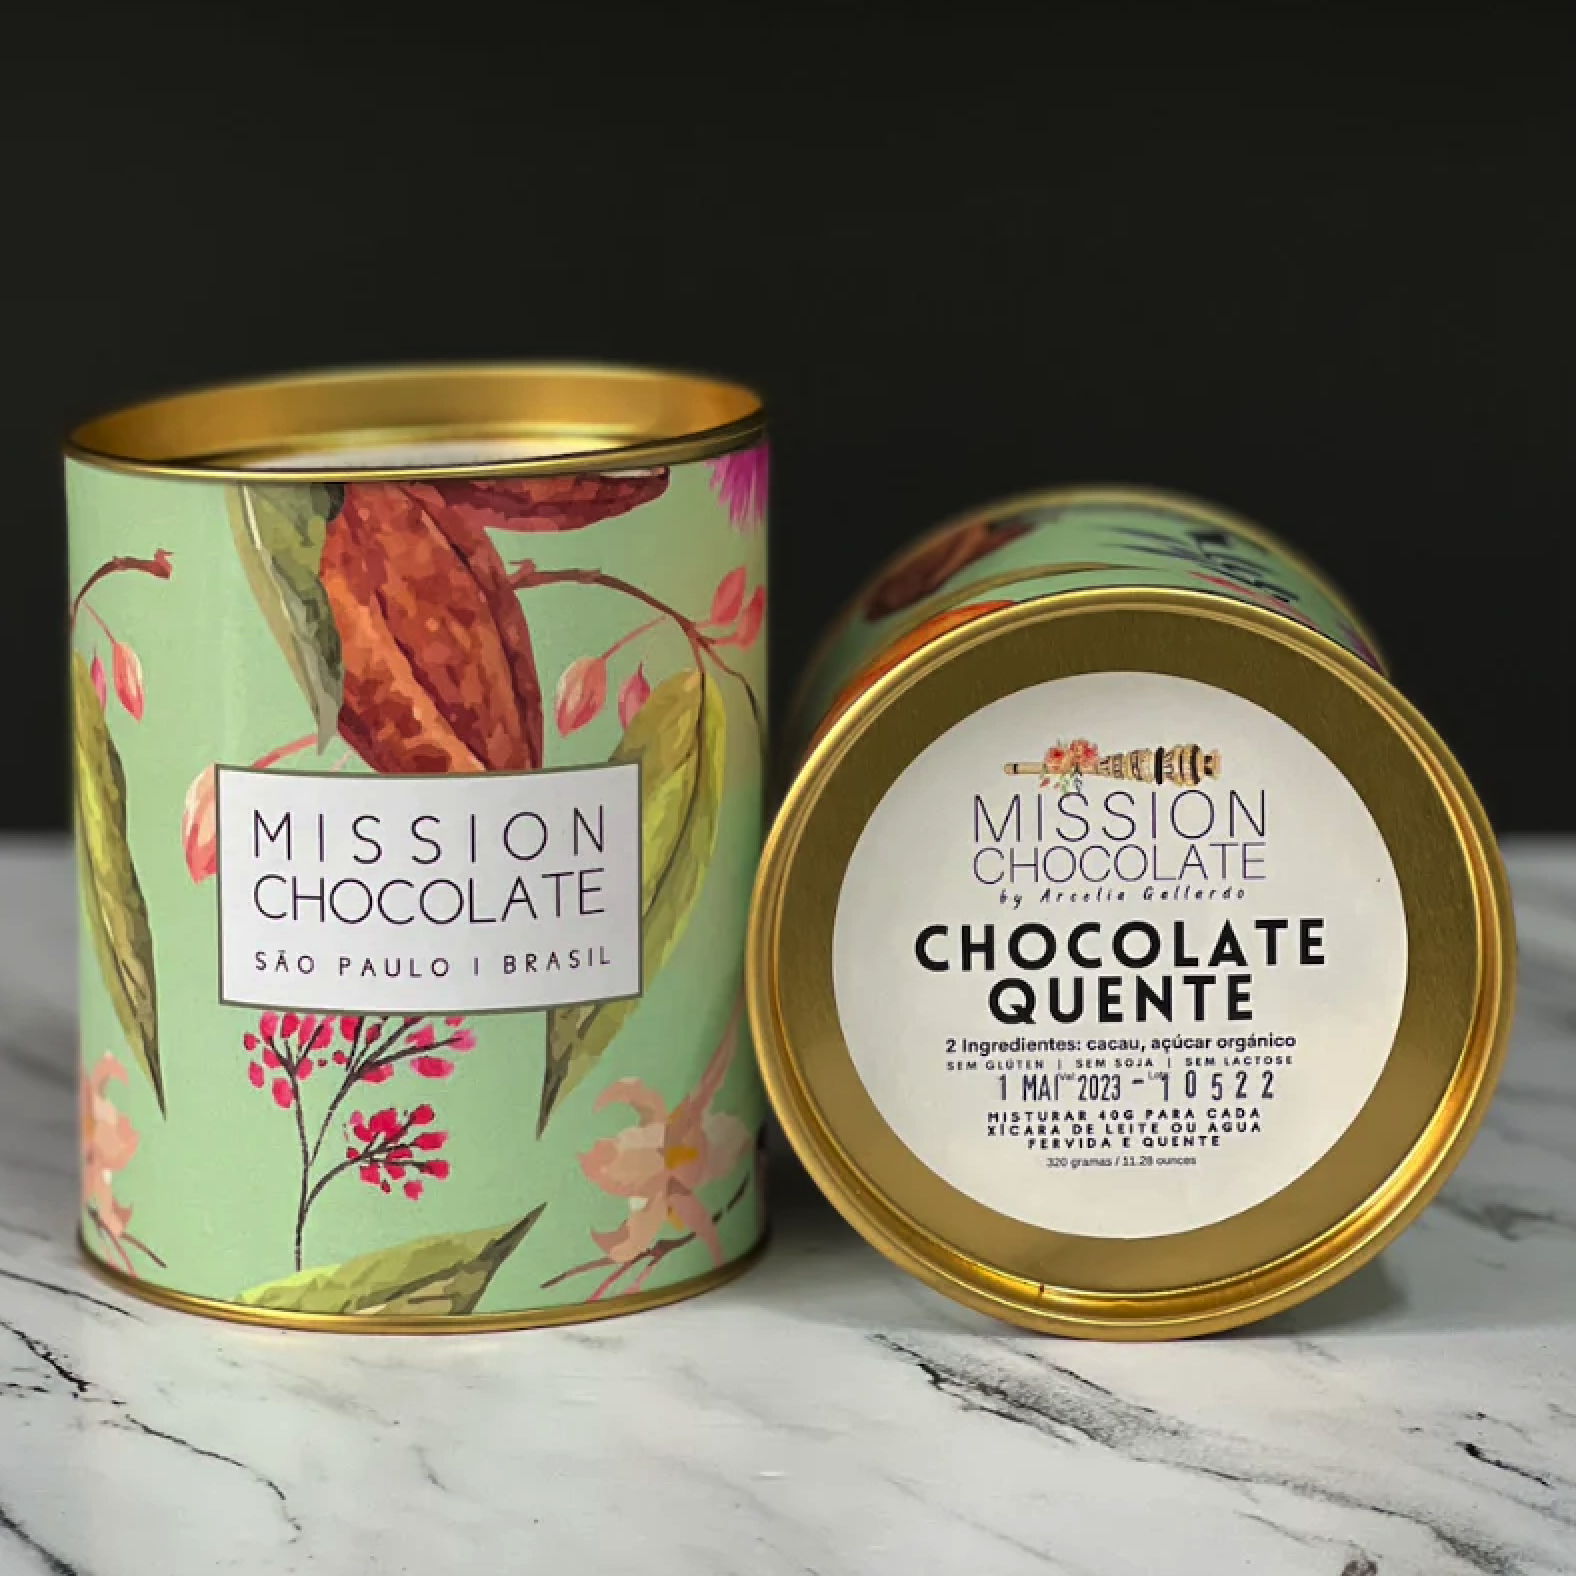 MISSION CHOCOLATE ミッションチョコレート ホットチョコレートパウダー 320g（Chocolate quente）